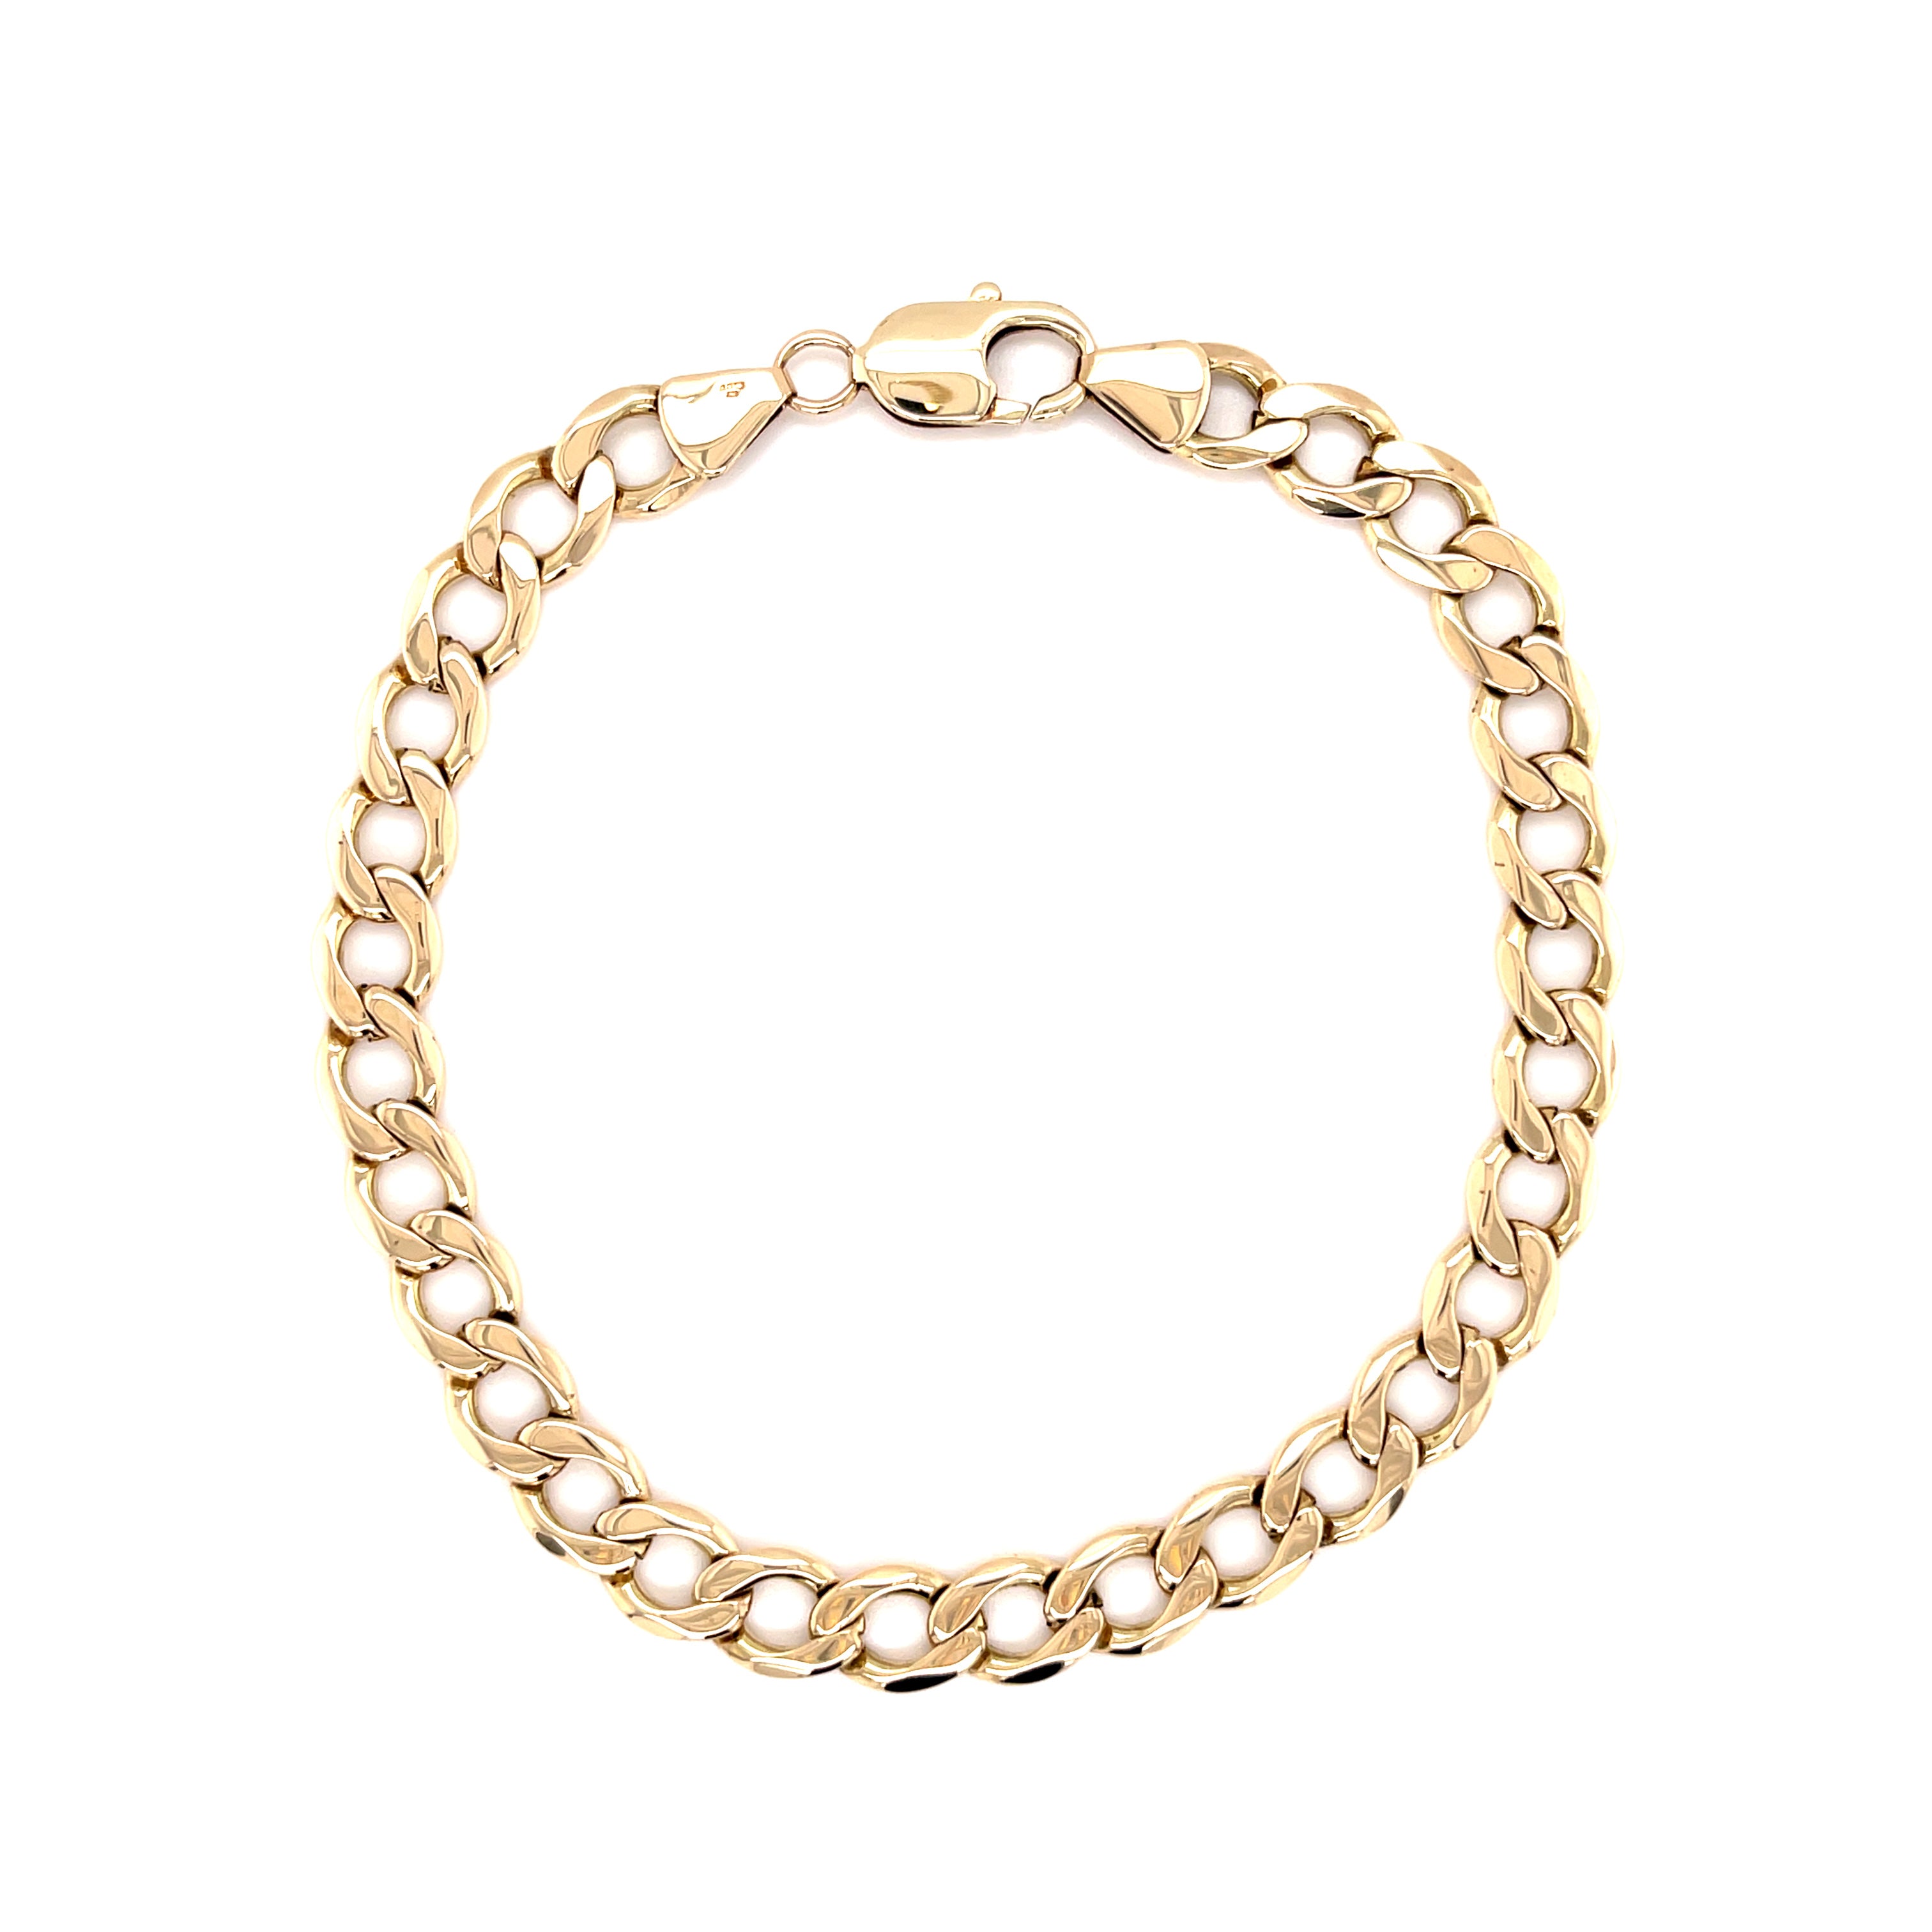 9ct Yellow Gold 9.5 Inch Curb Link Bracelet - 18.20g